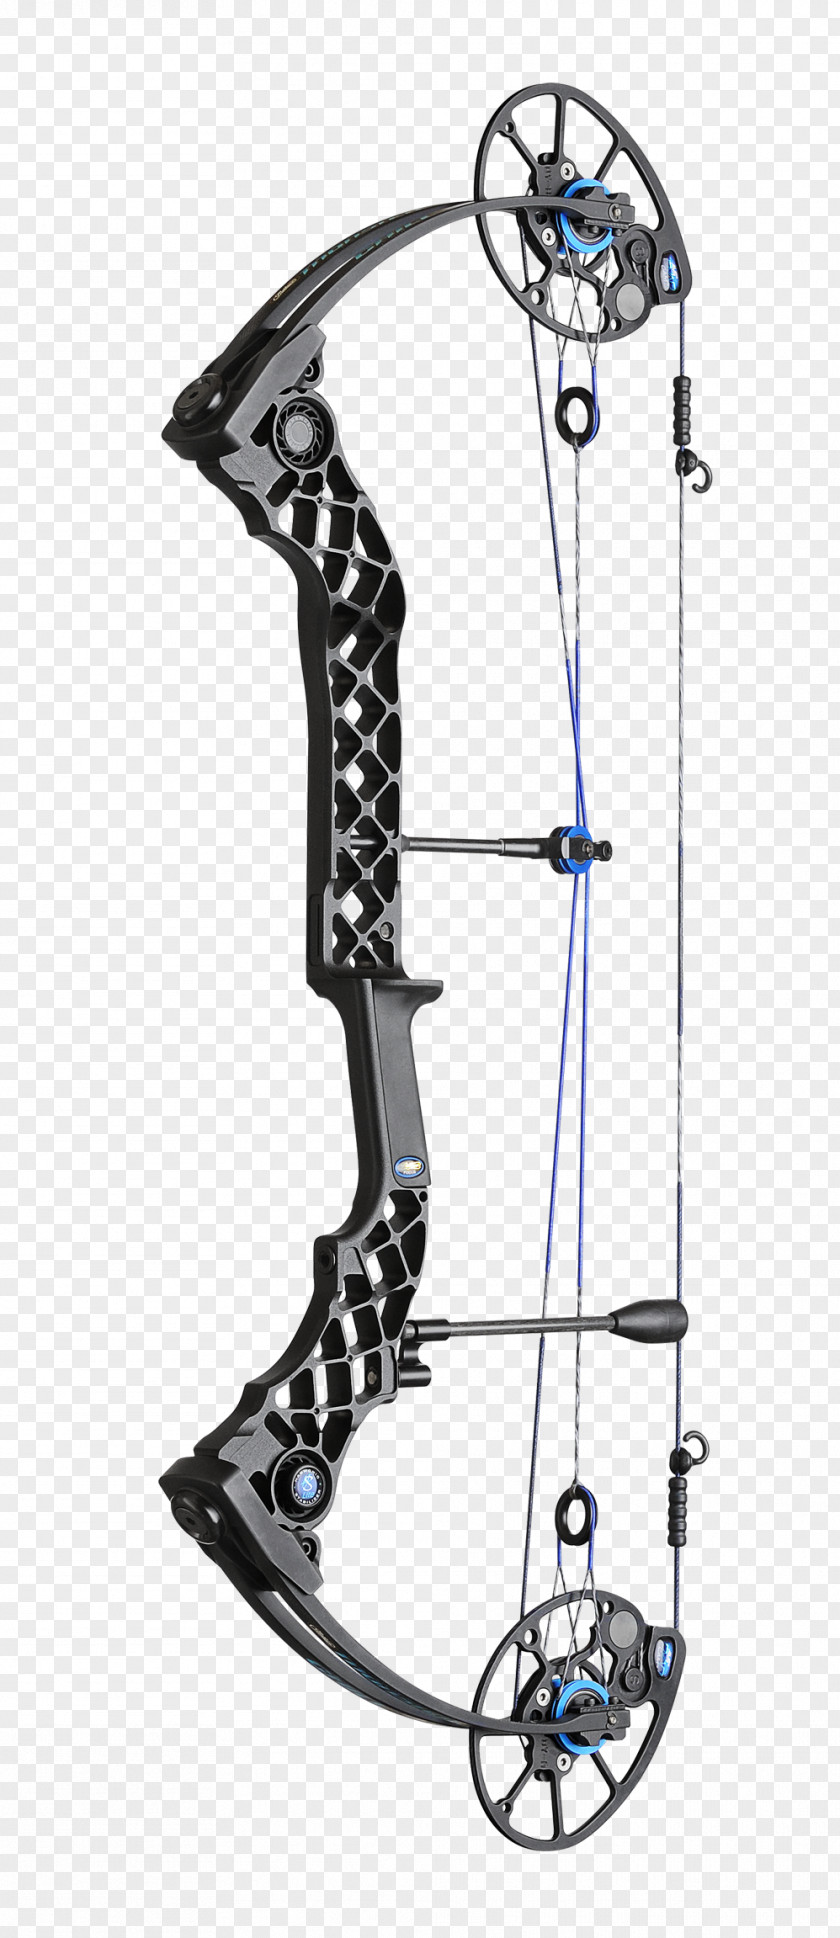 Archery Mathews Archery, Inc. Compound Bows Bow And Arrow Bowhunting PNG